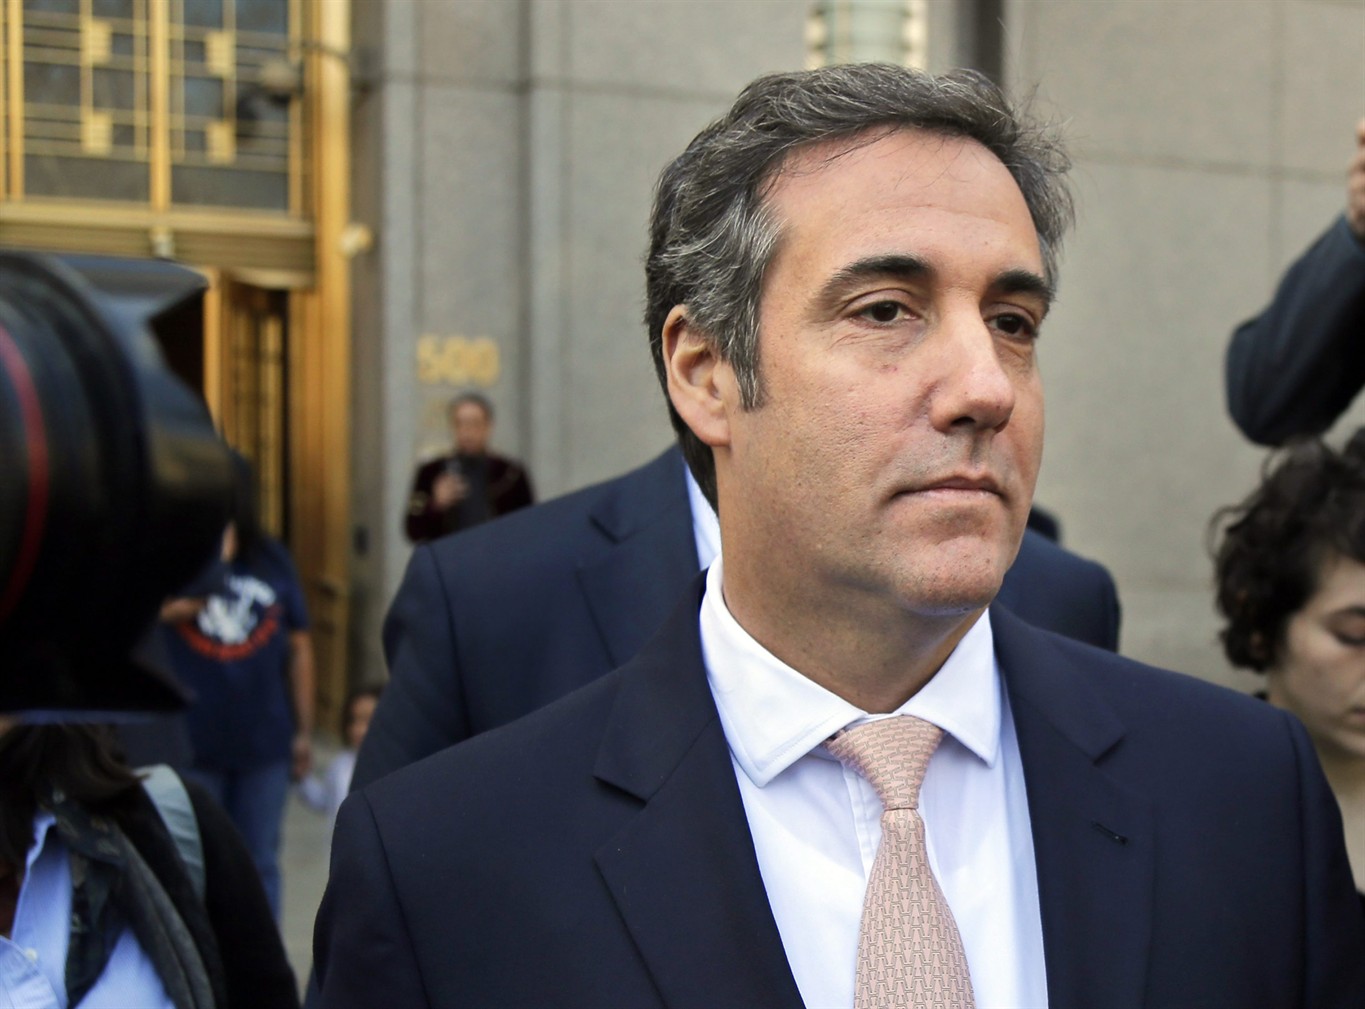 Trump legal team waived attorney-client privilege on Cohen recording